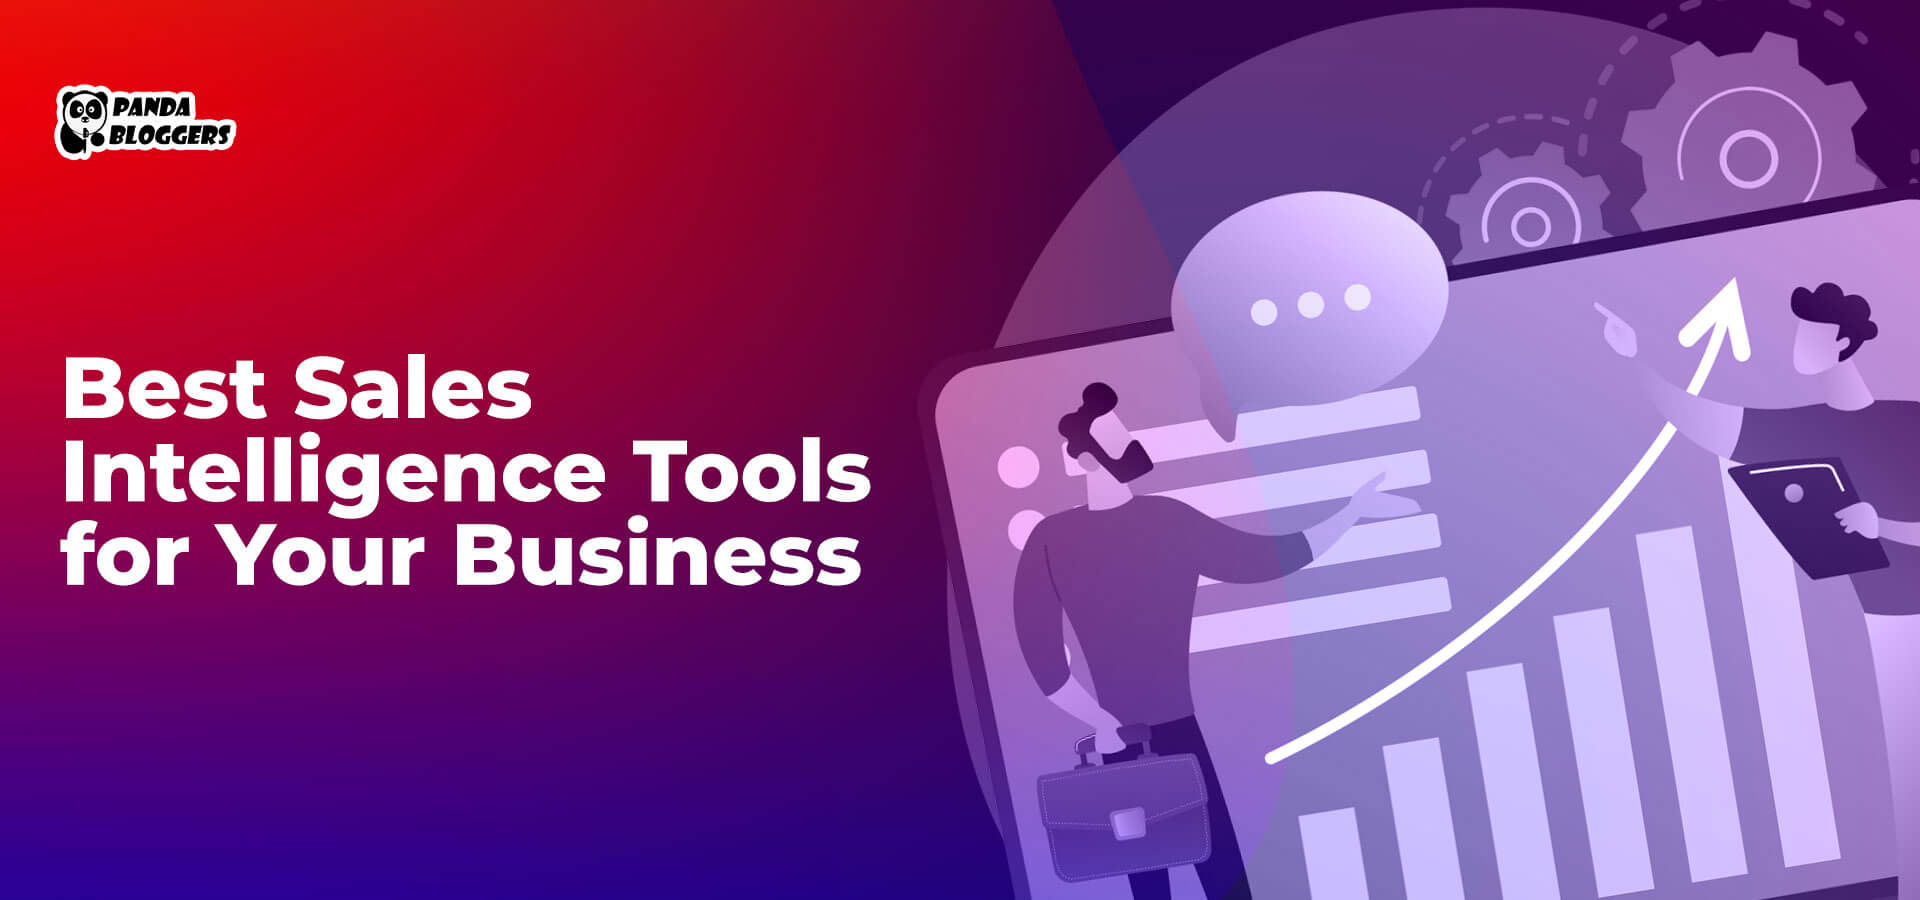 Best Sales Intelligence Tools for Your Business